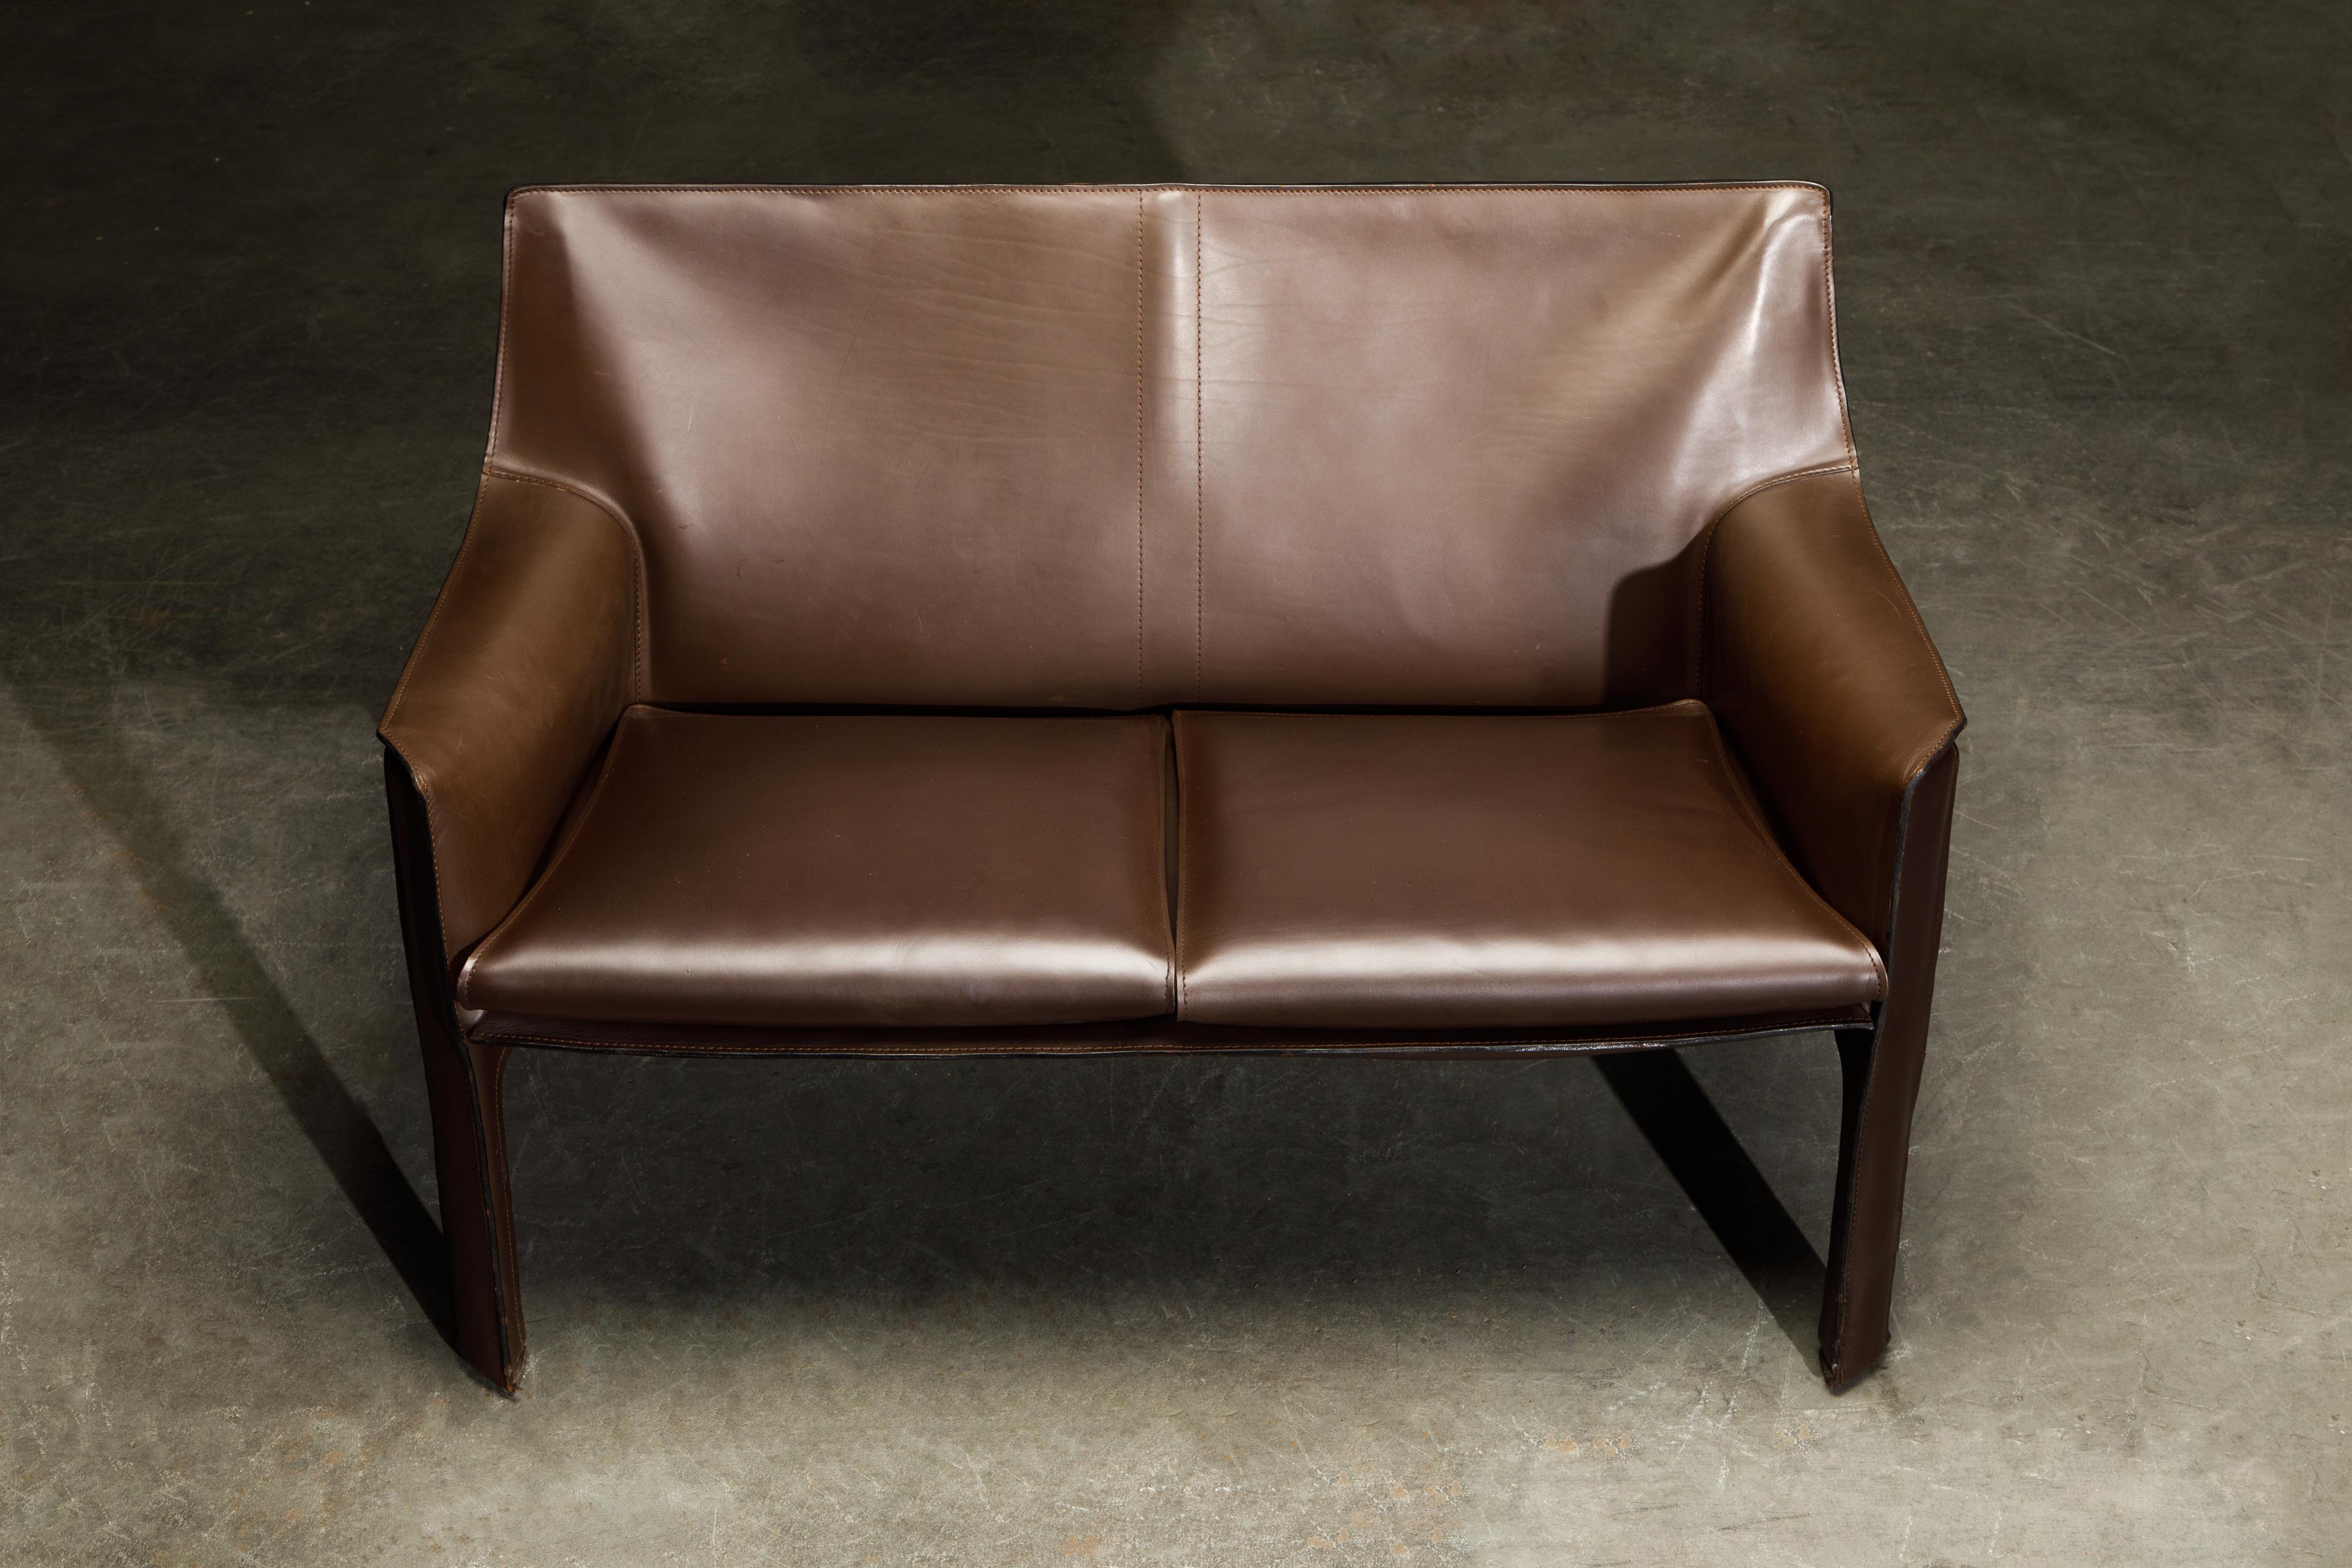 A beautiful Mario Bellini Model #414 'Cab' two-seater sofa in deep brown leather, signed Cassina, designed in the 1970s, this example produced in the early 2000's. These fine examples of the cab line by Mario Bellini for Cassina are classic staples